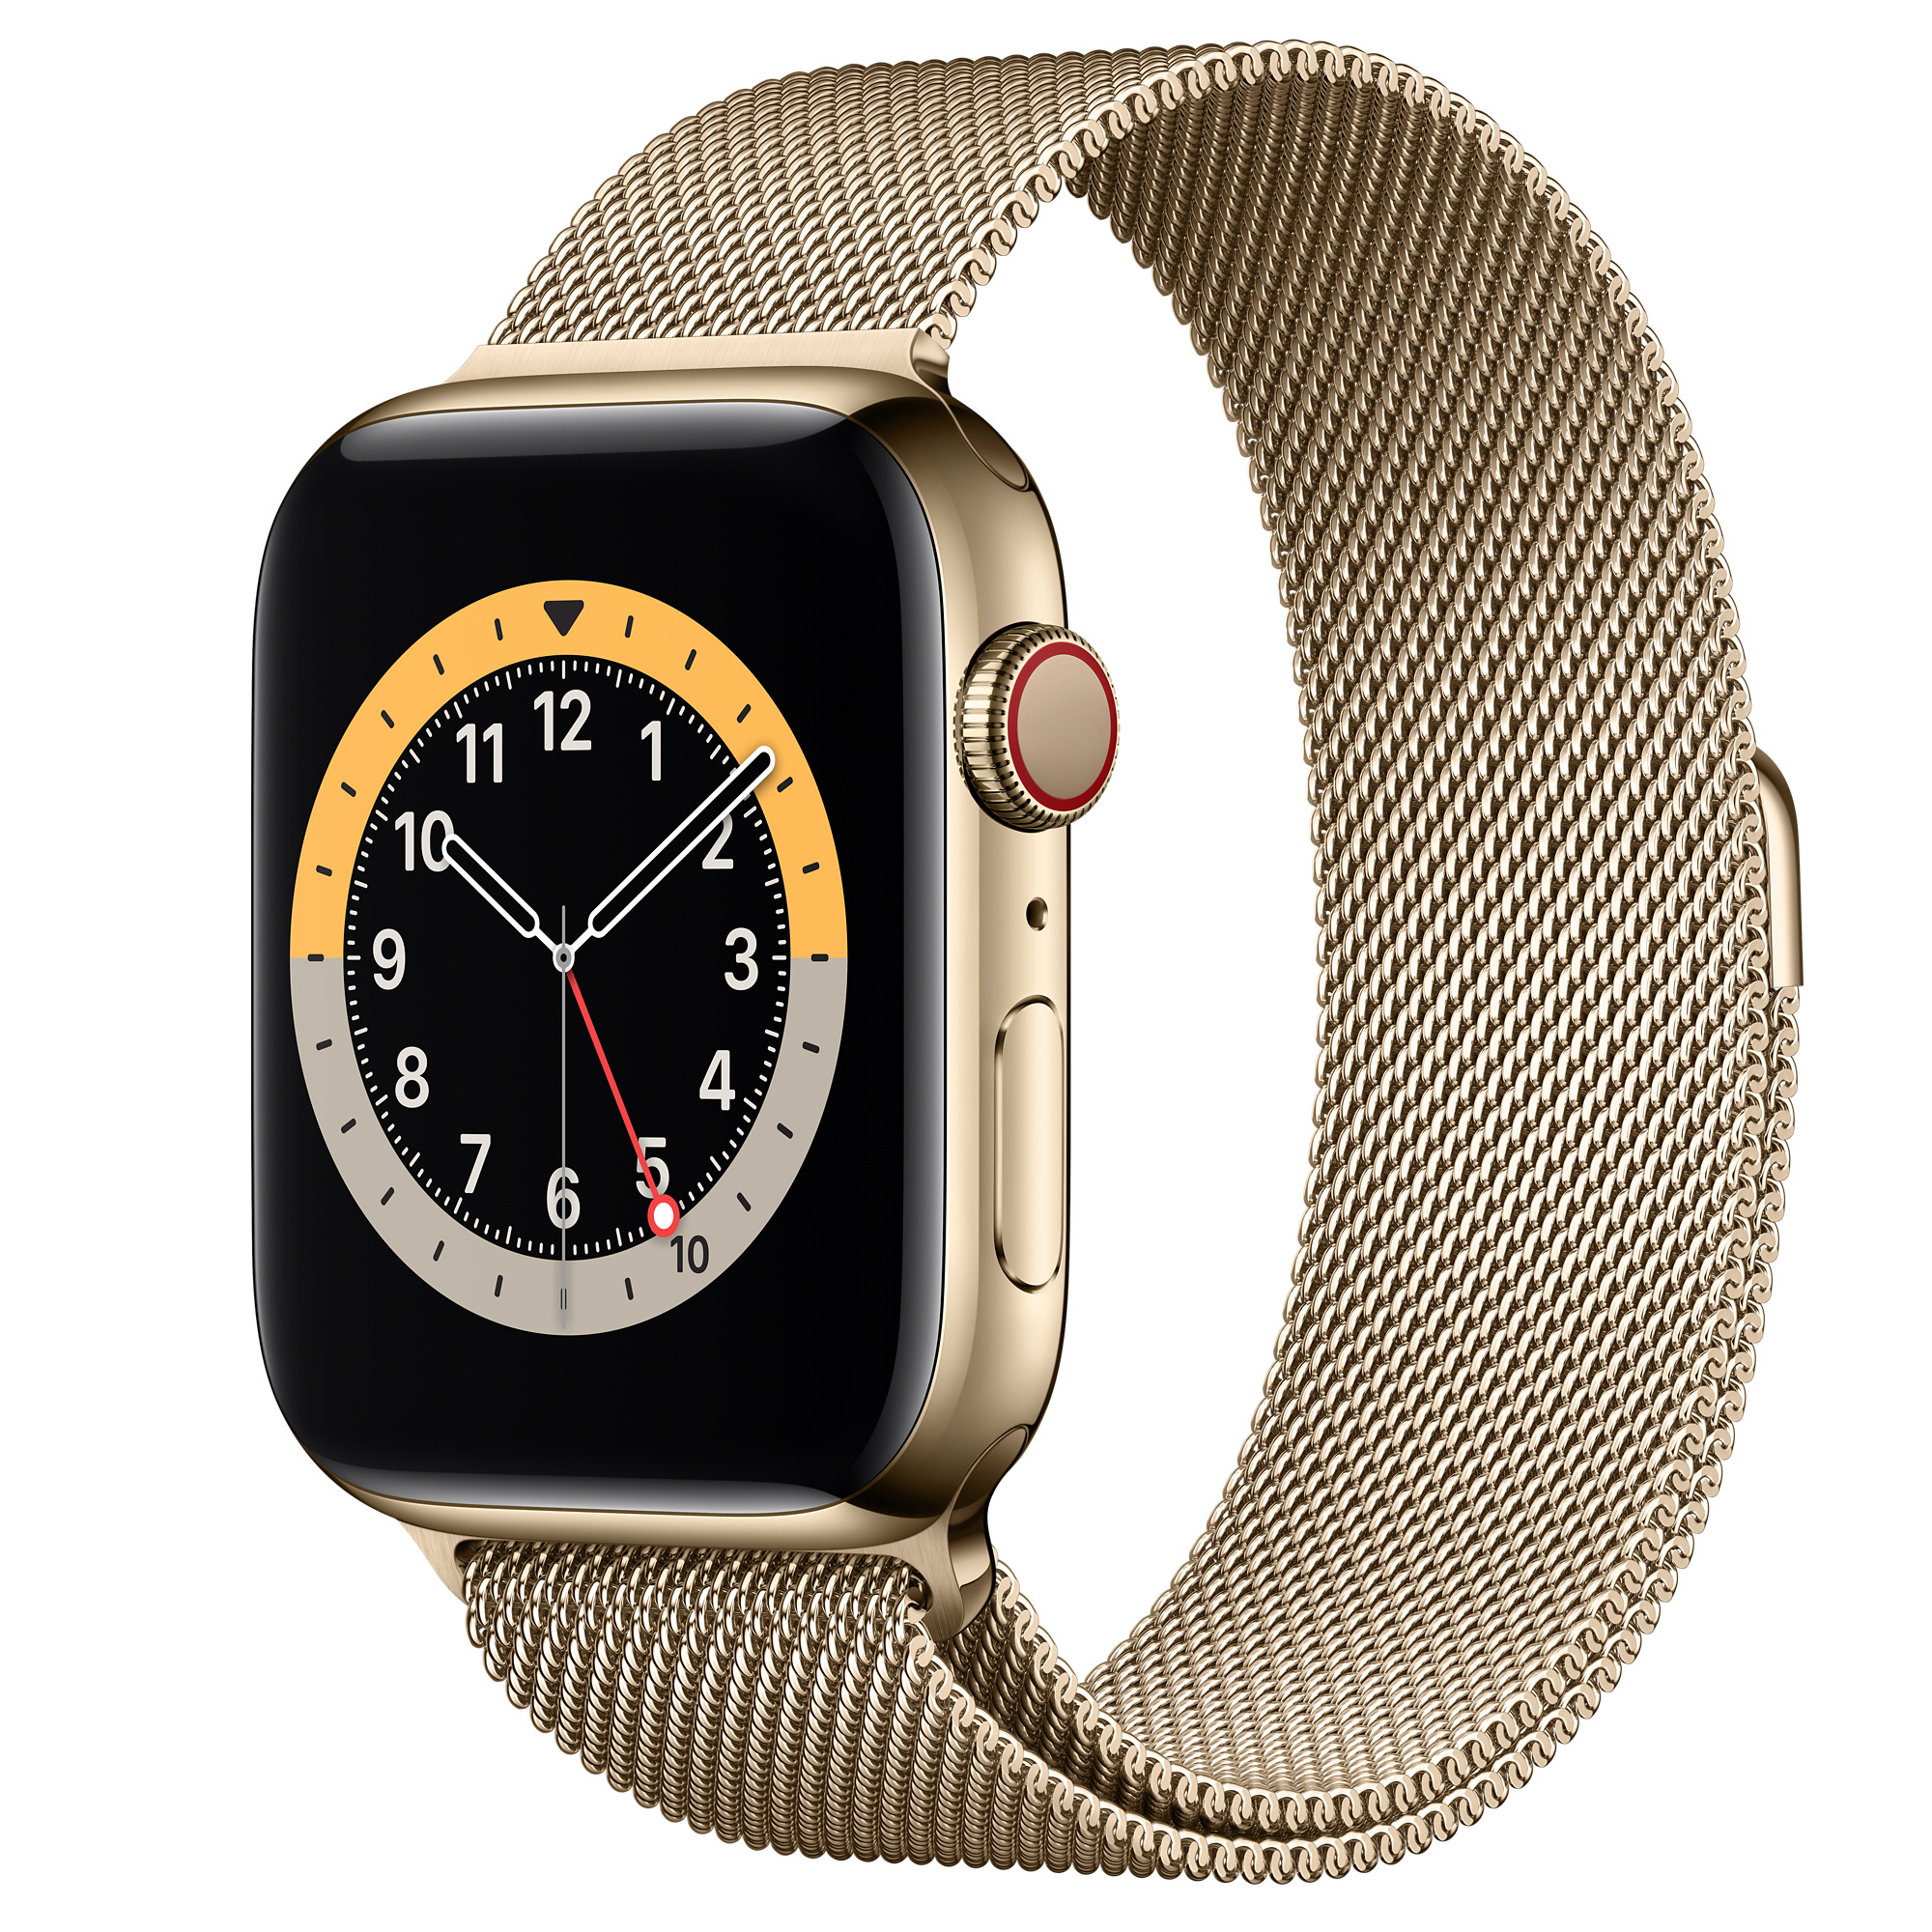 Apple Watch Series 6 GPS + Cellular, 44mm Gold Stainless Steel